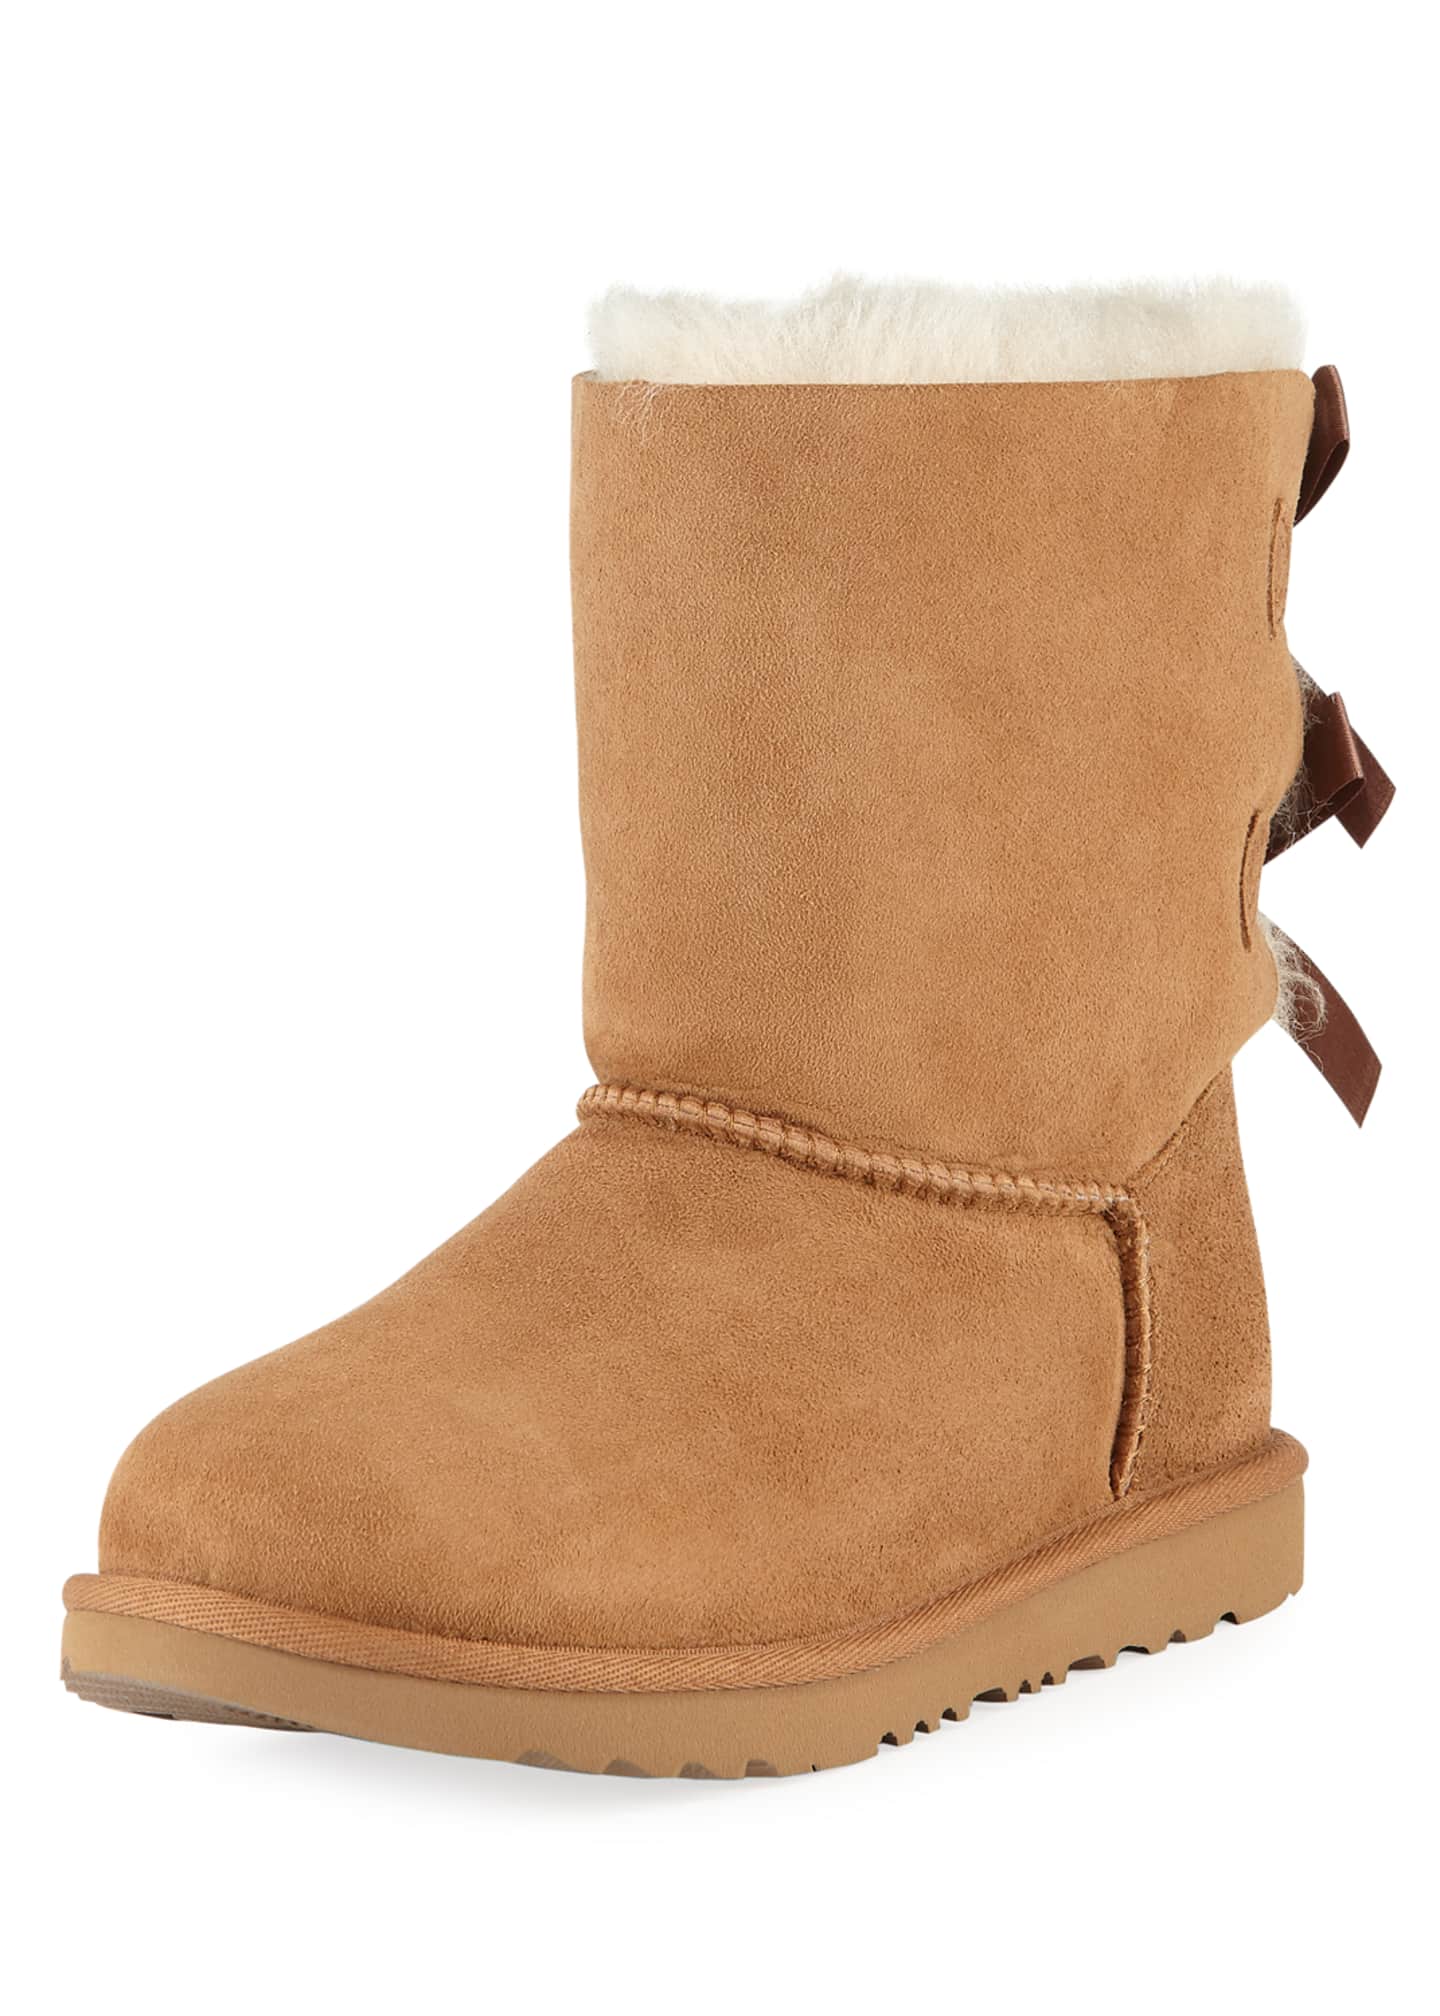 ugg boots childrens sizes